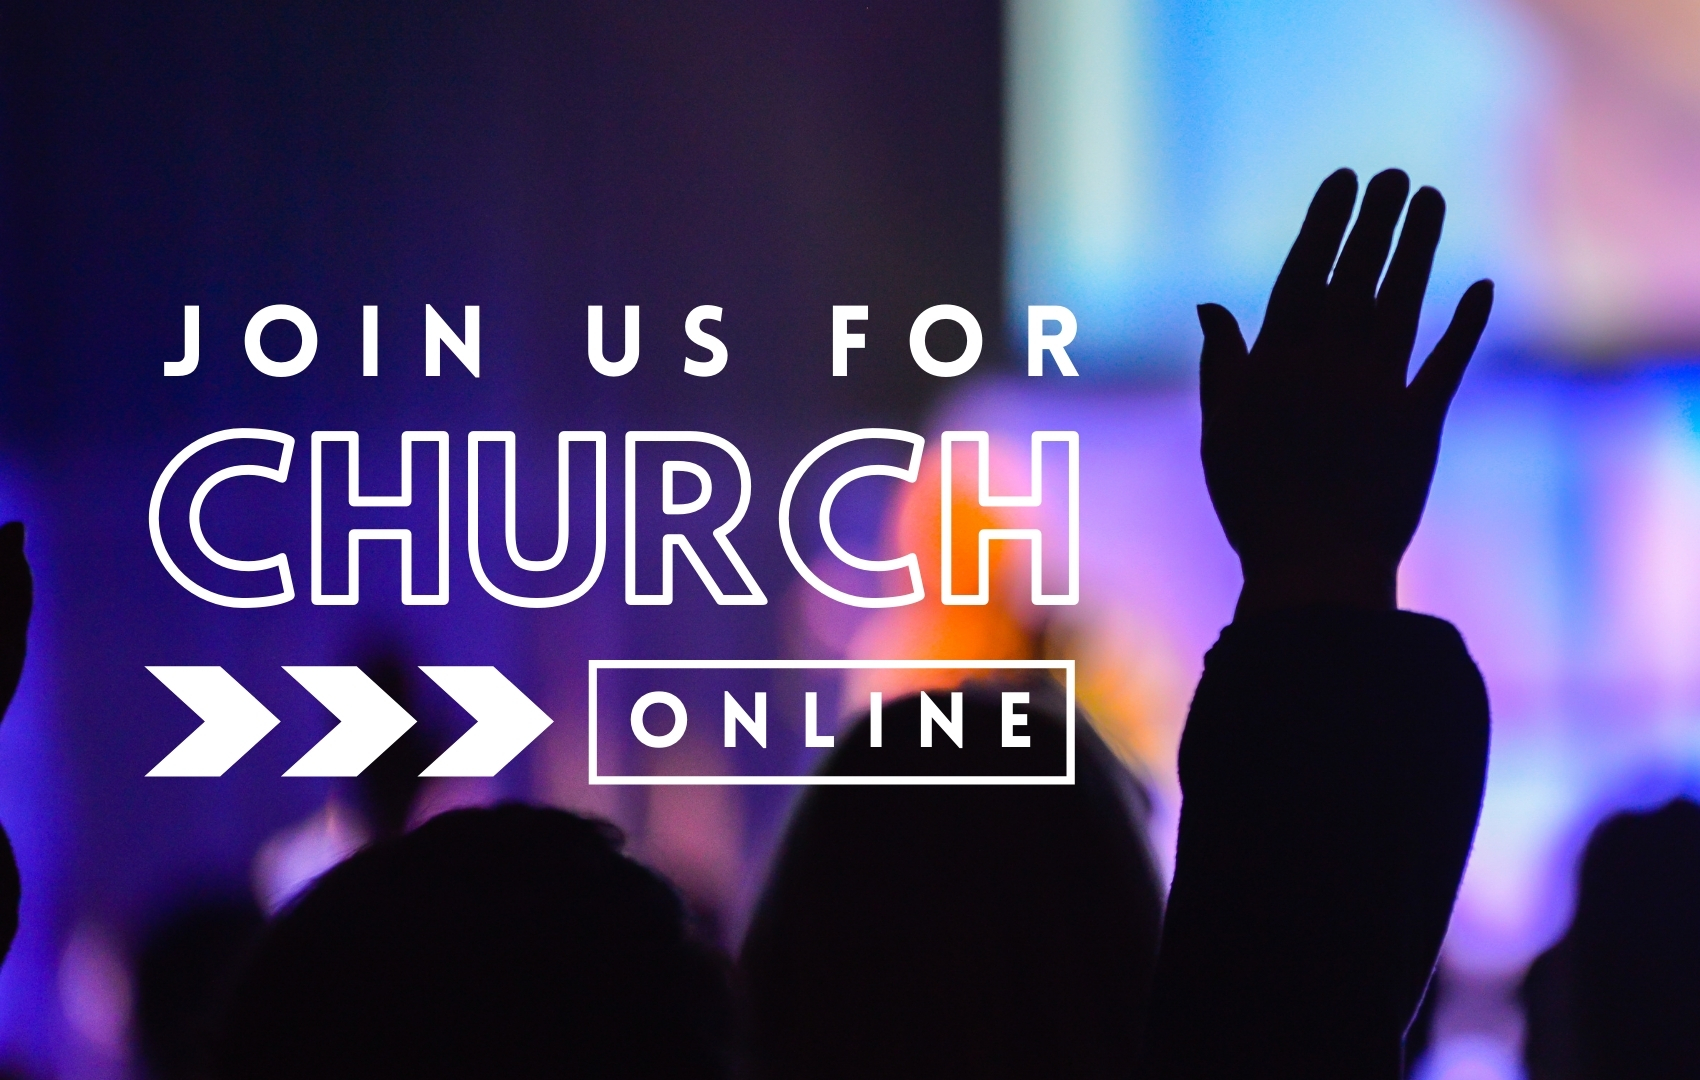 Join us for Bethel Life Church Online - click here